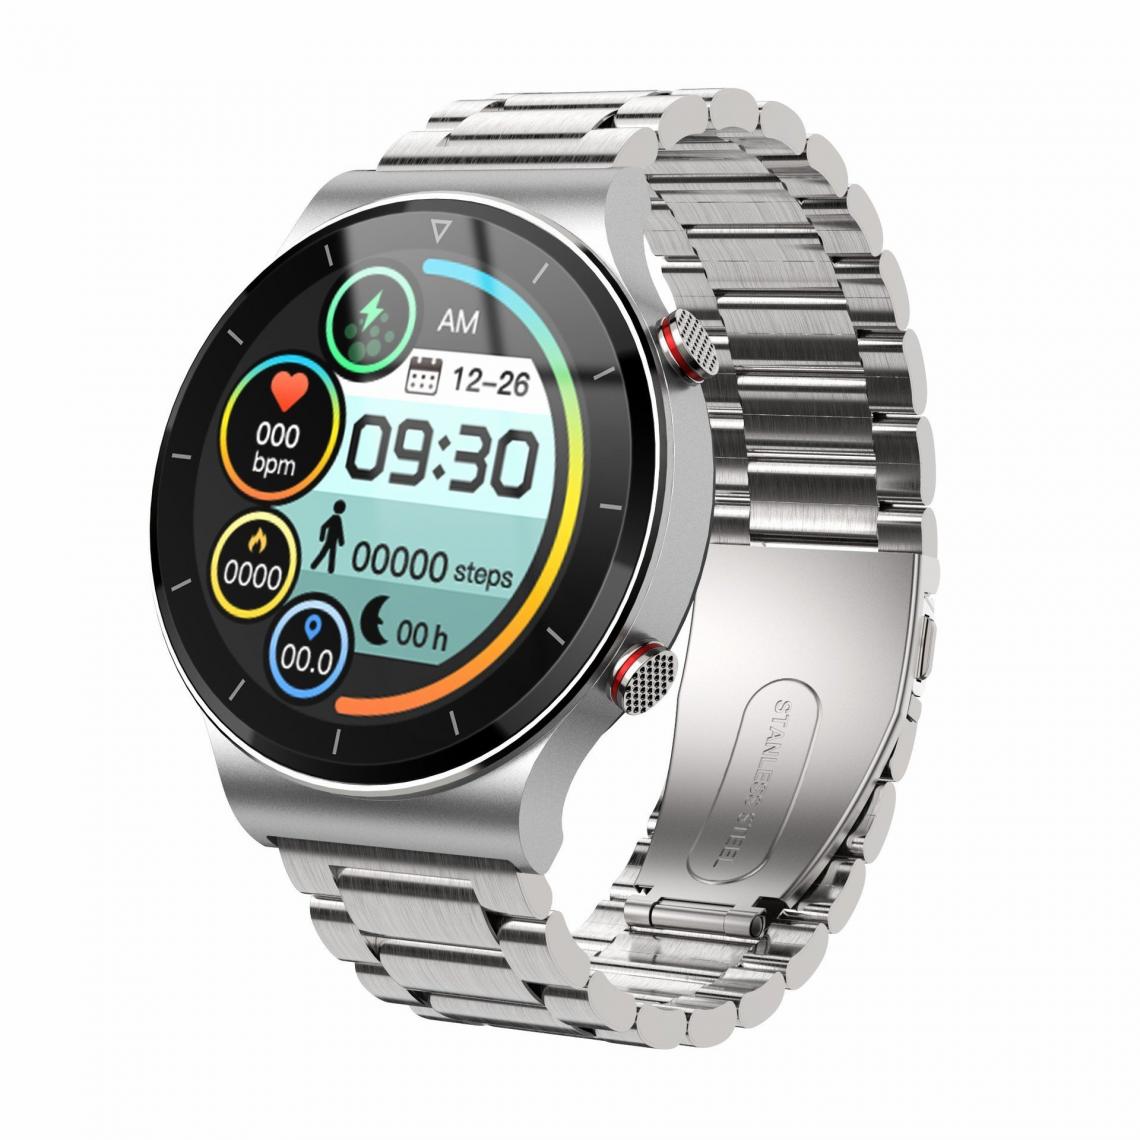 Chronotech Montres - Chronus Smart Watch, 1.3 Inch Round Colorful Display, Bluetooth Call, Local Music, Message Reminder, Multi-Dial, Multiple Sports Modes, IP67 Waterproof, Female Menstrual Cycle(silver) - Montre connectée